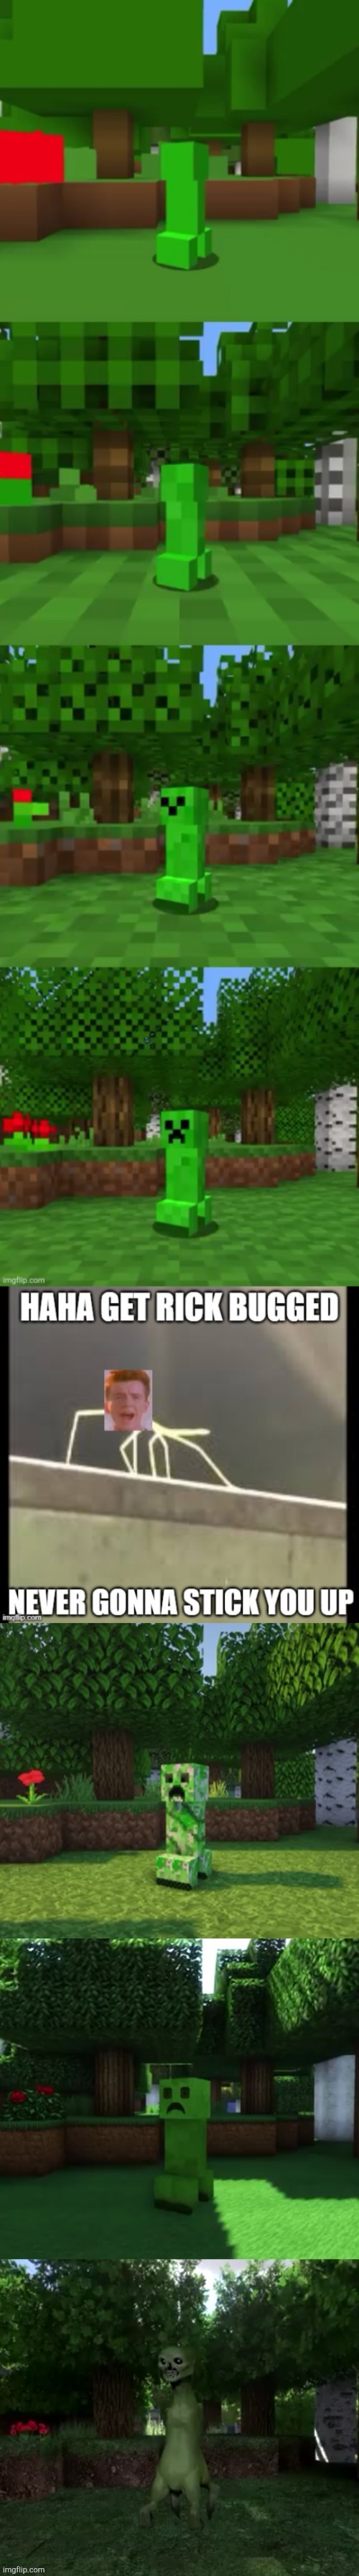 the graphics are increasing | image tagged in minecraft,rtx,rickbugged,rickroll,lol | made w/ Imgflip meme maker